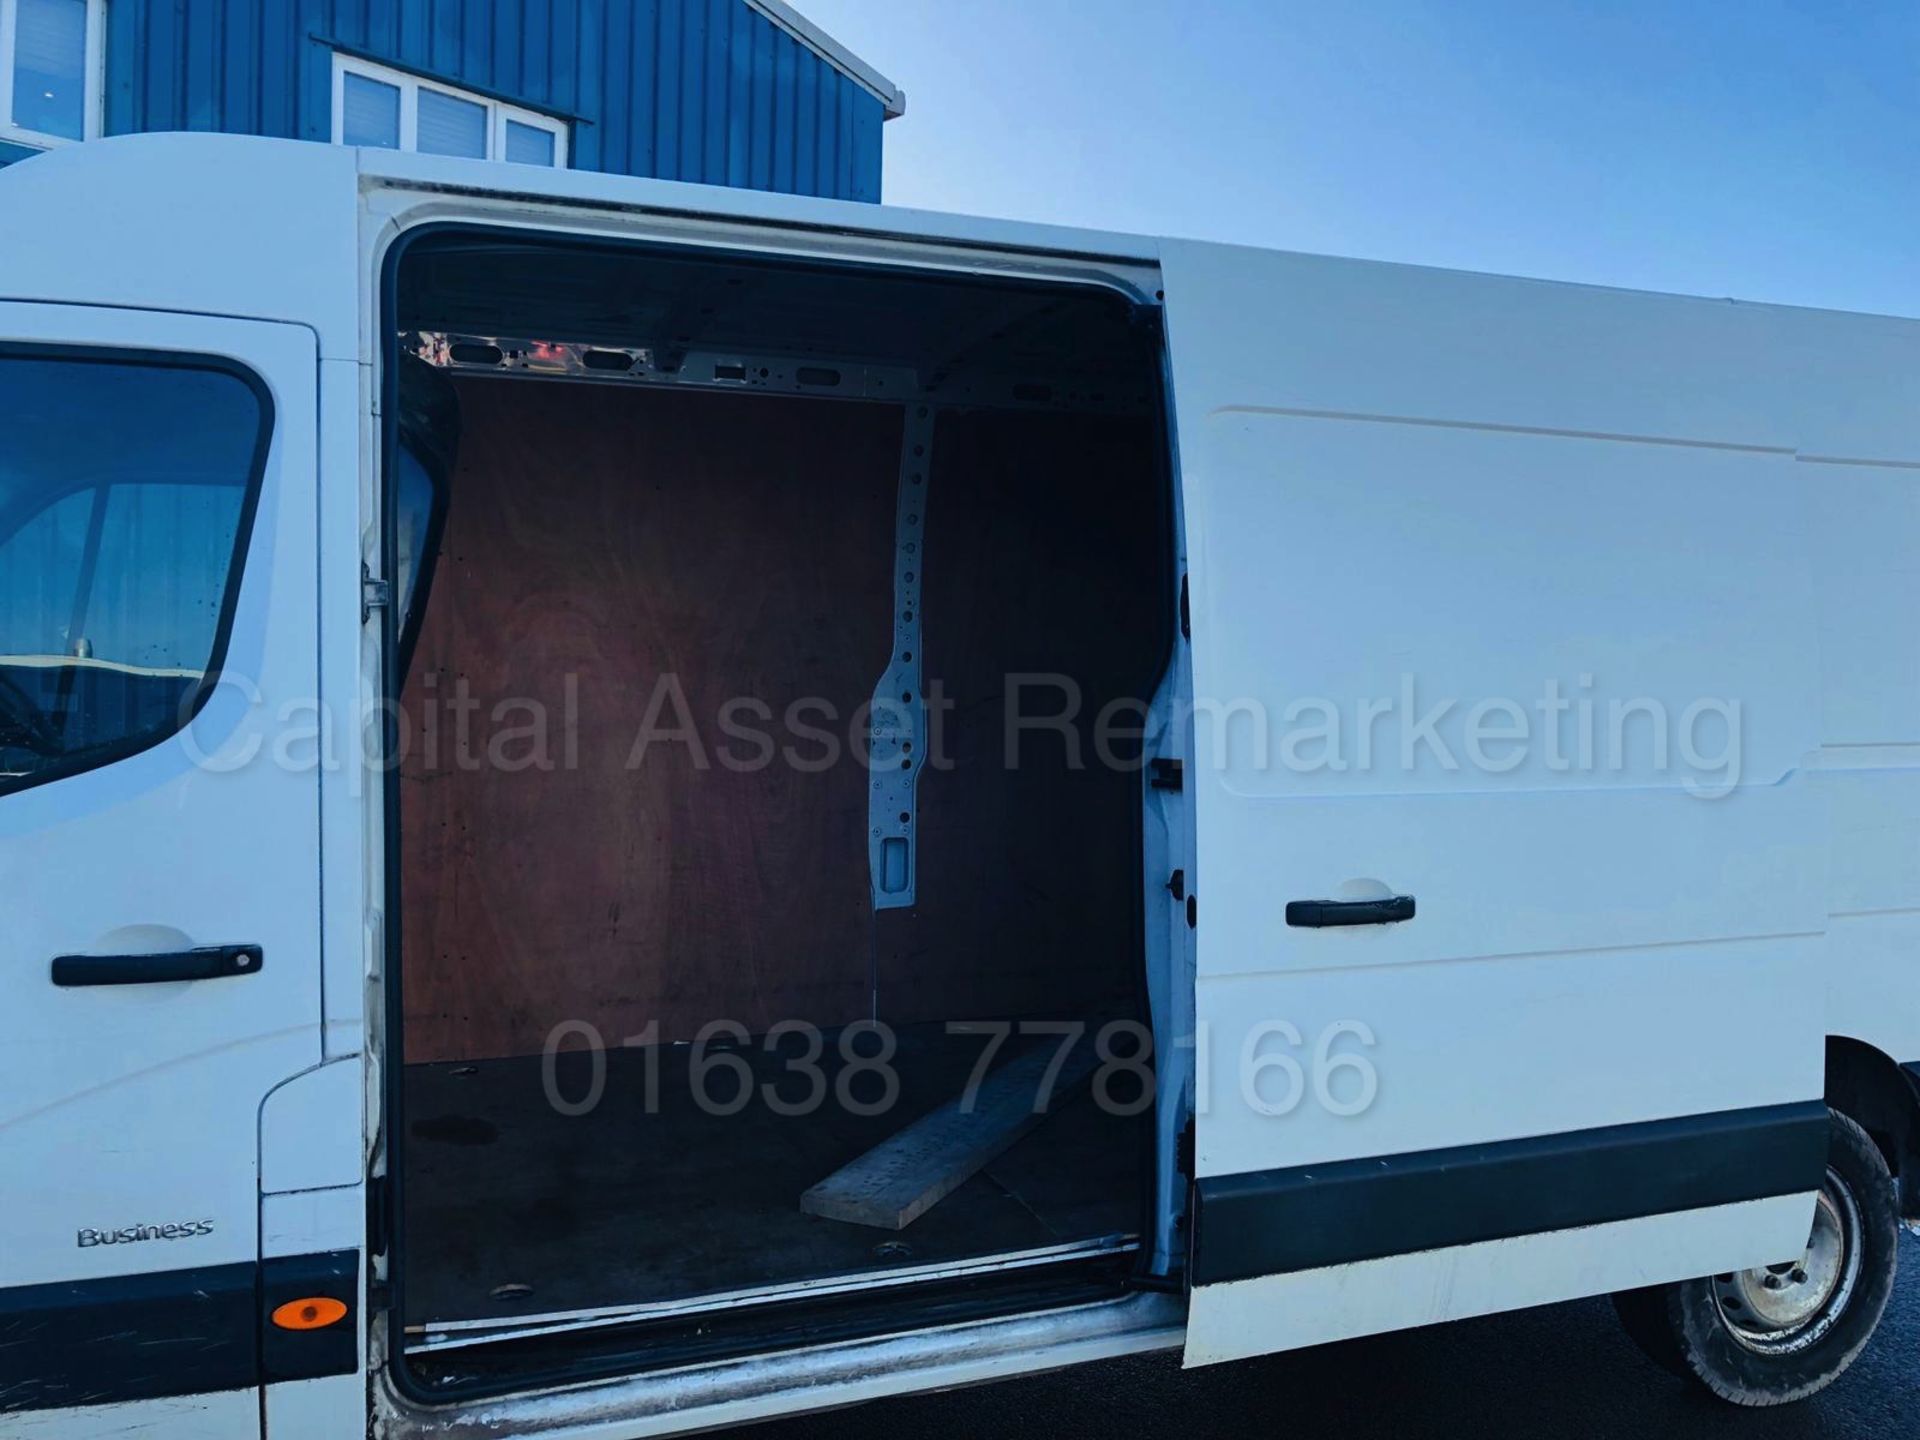 RENAULT MASTER LM35 *LWB - BUSINESS EDITION* (2016) '2.3 DCI - 110 BHP - 6 SPEED' *ULTRA LOW MILES* - Image 19 of 23